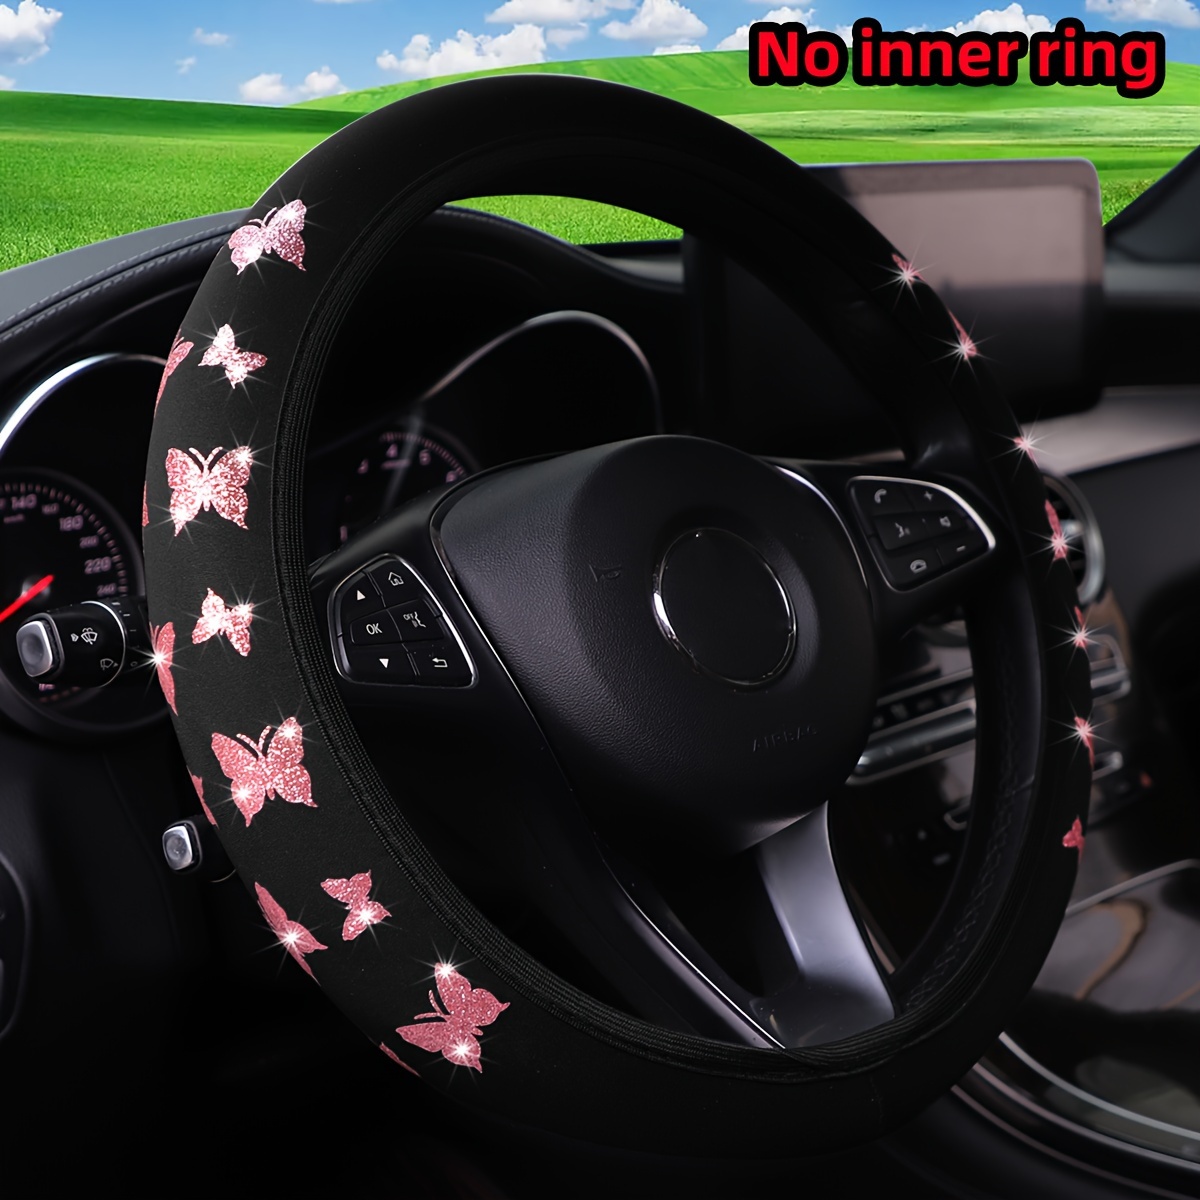 

Glitter Butterfly Steering Wheel Cover, Durable Polyester Fabric, Non-slip Grip, No Inner Circle, Fits 14.5-15 Inch Steering Wheels